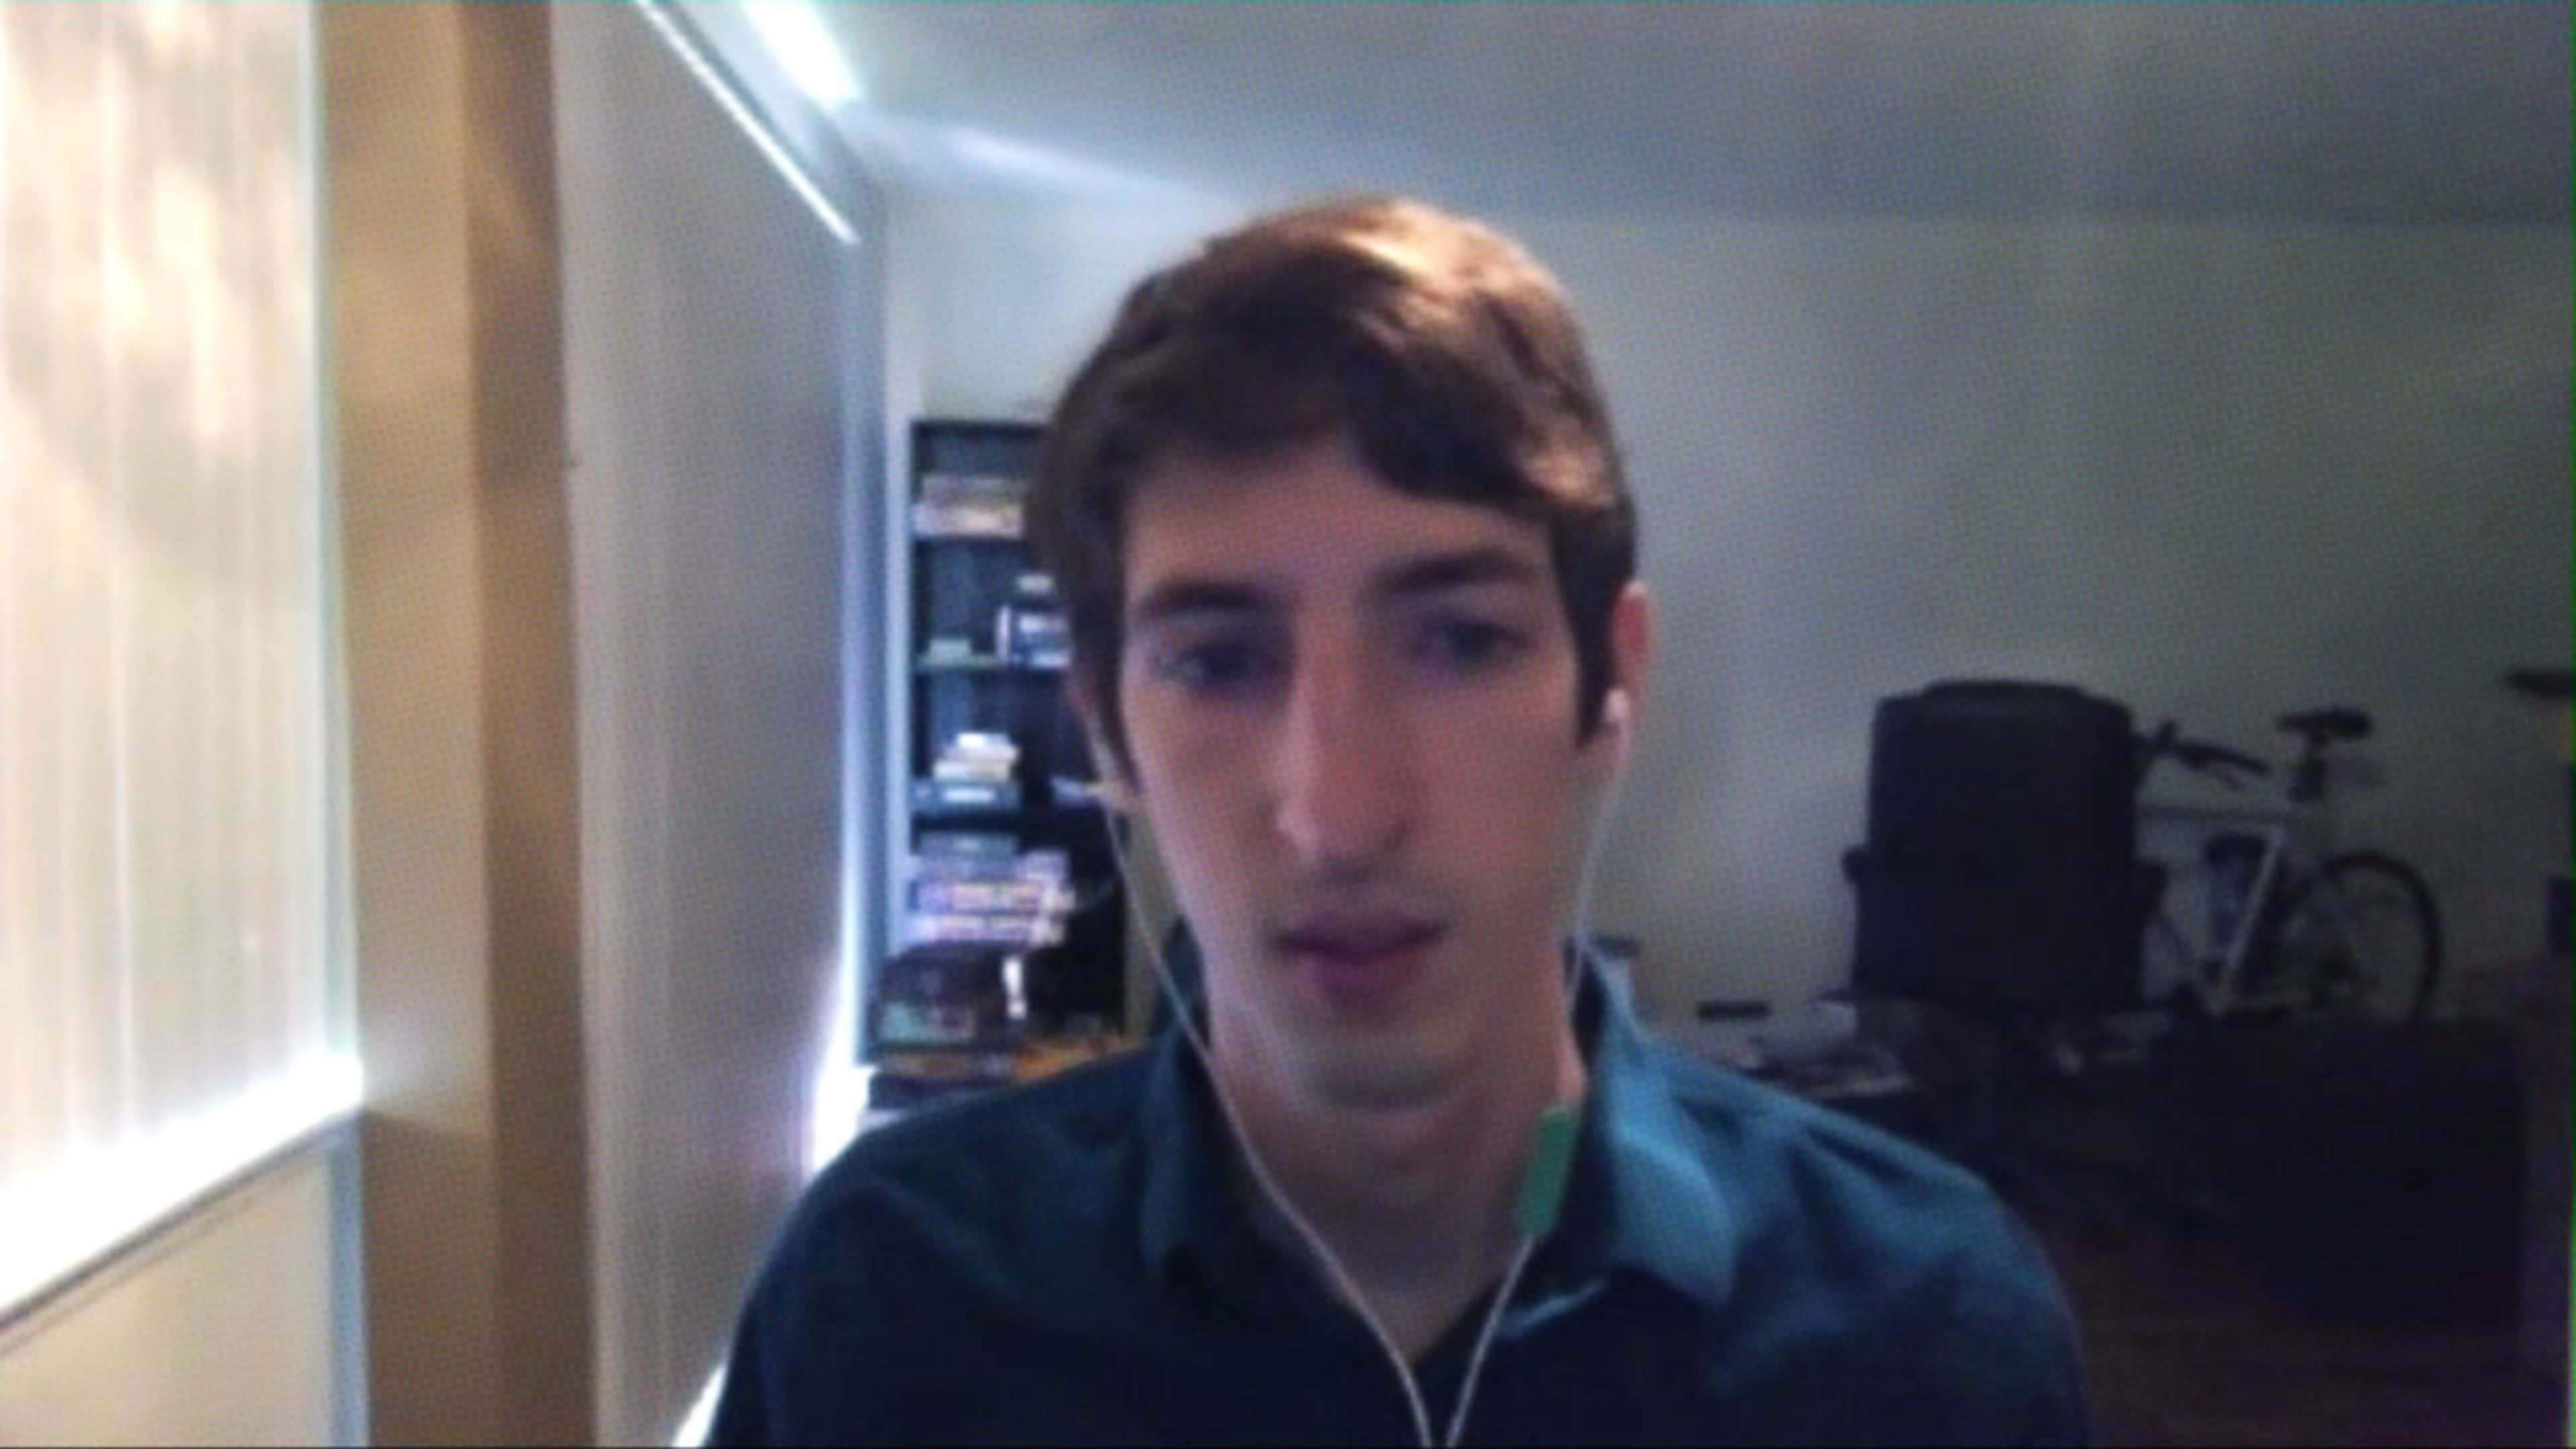 Fired By Google, James Damore Takes His Case To YouTube